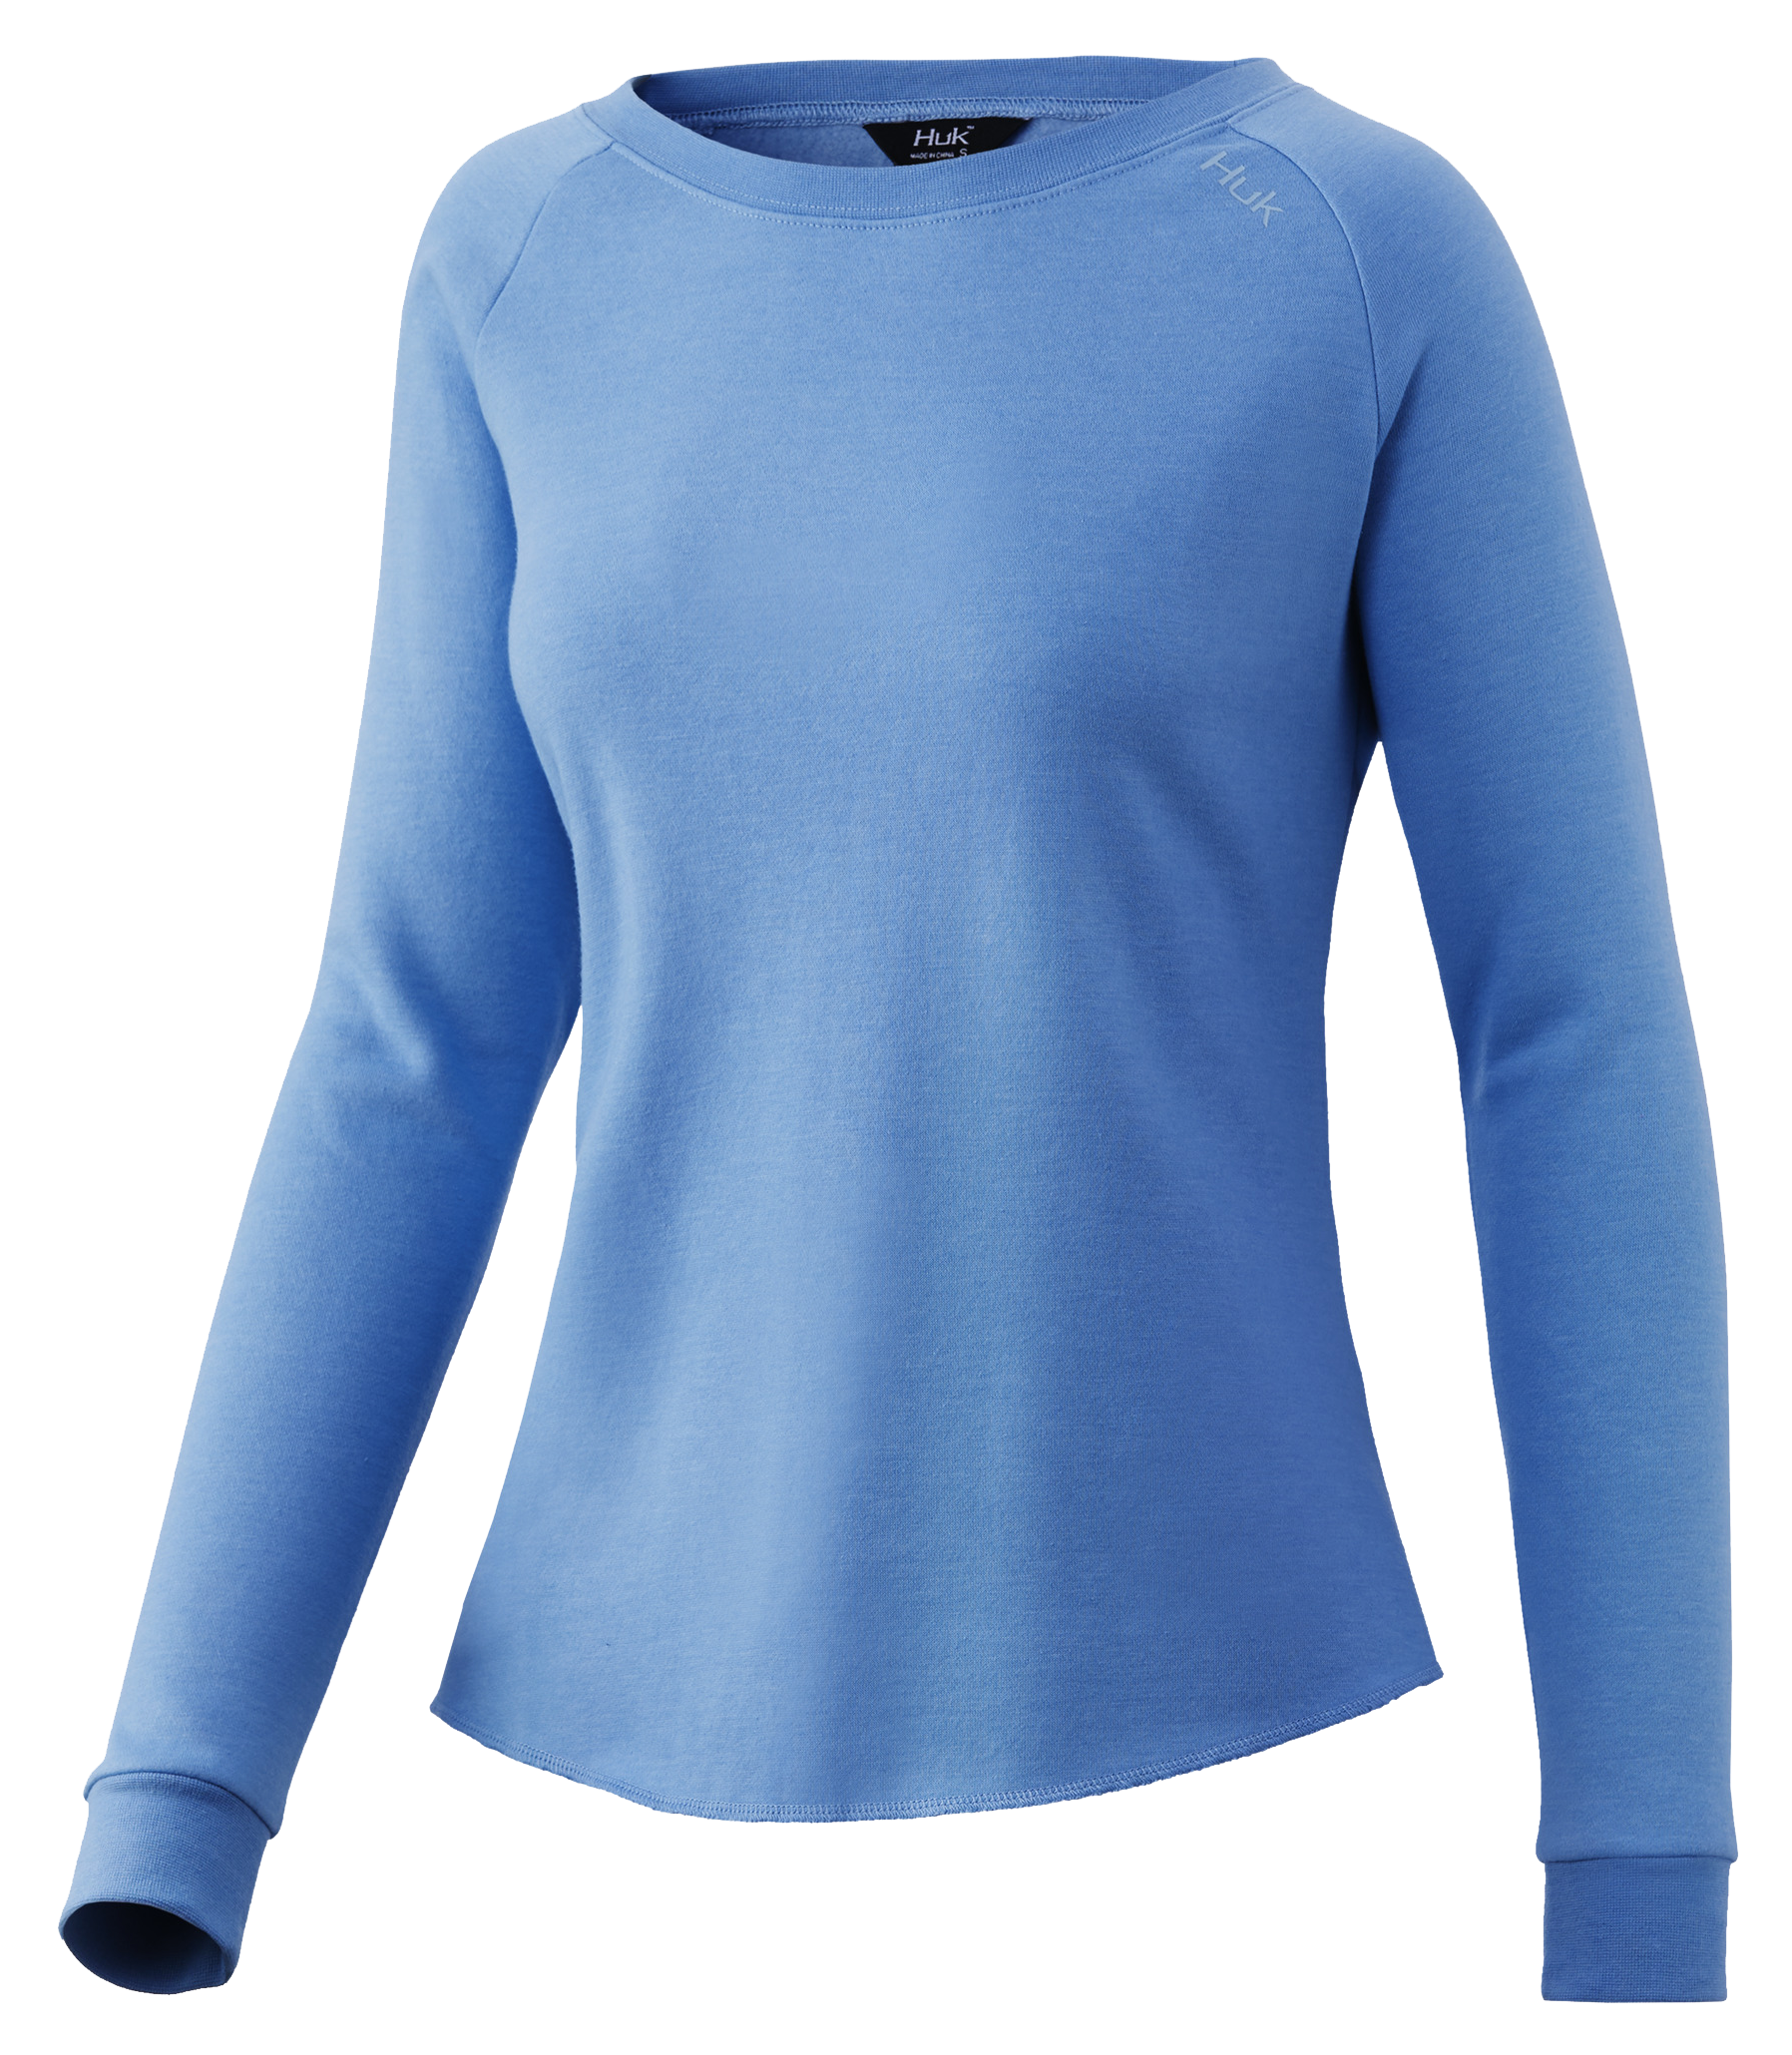 Huk Folly Crew Fleece Long-Sleeve Pullover for Ladies